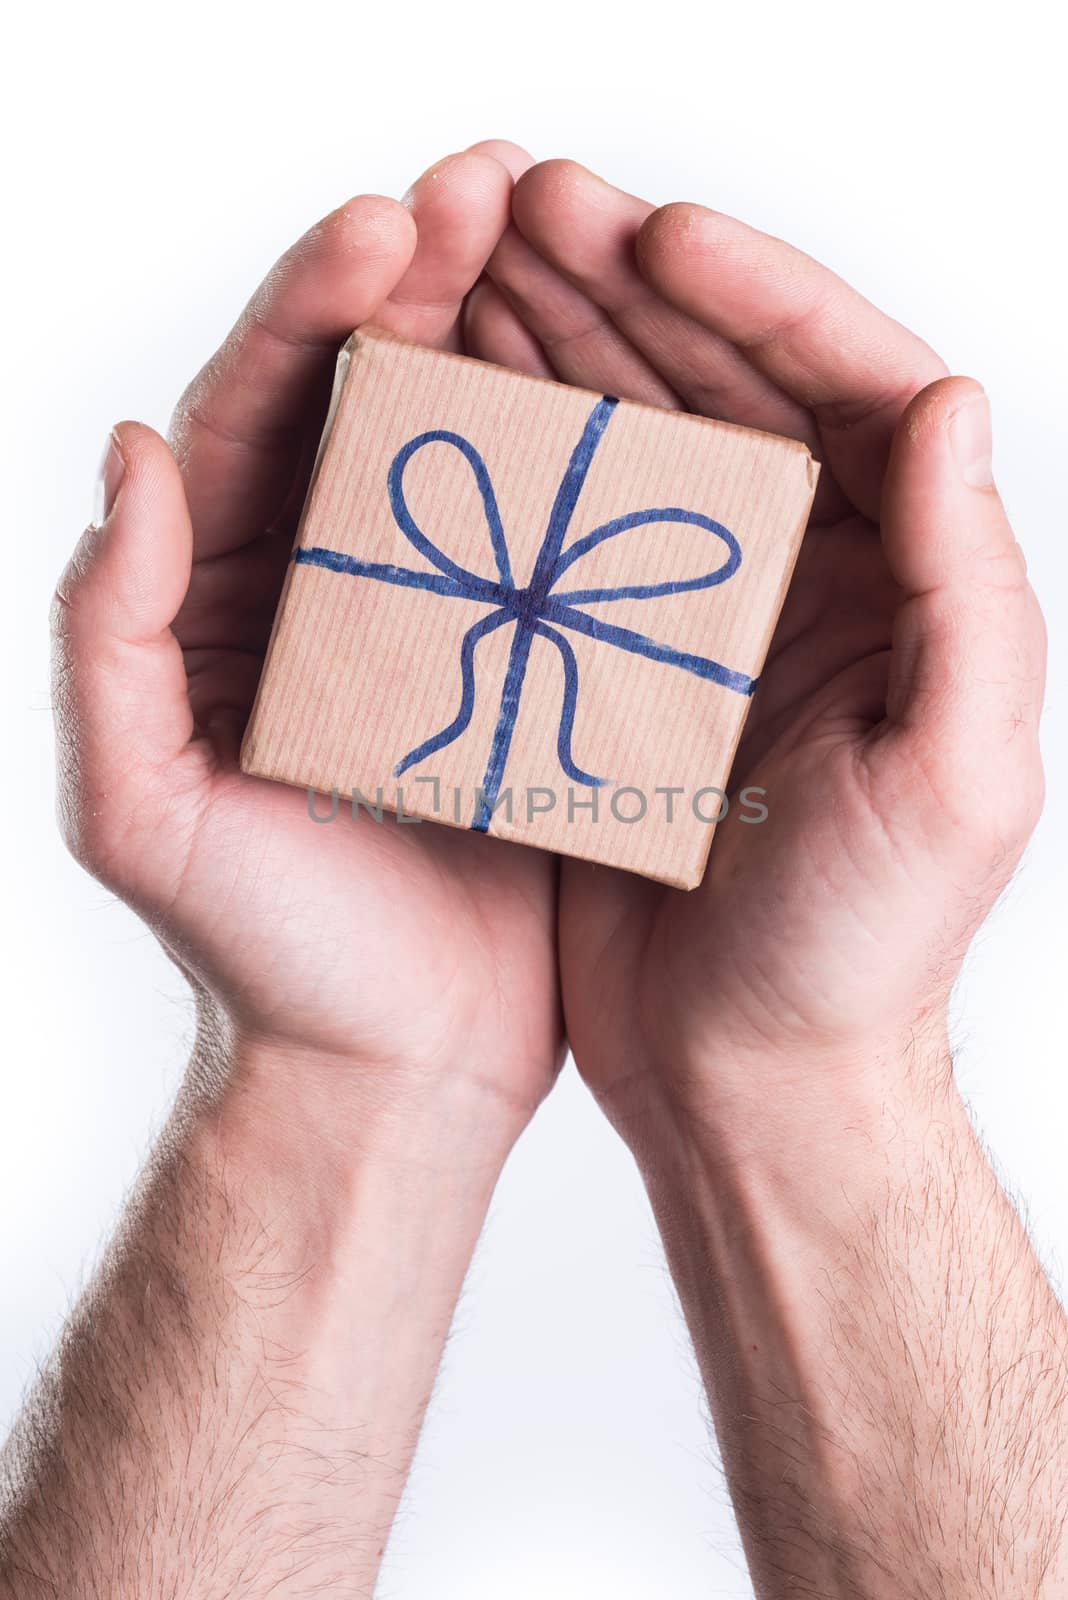 Concept hands giving gift on white background